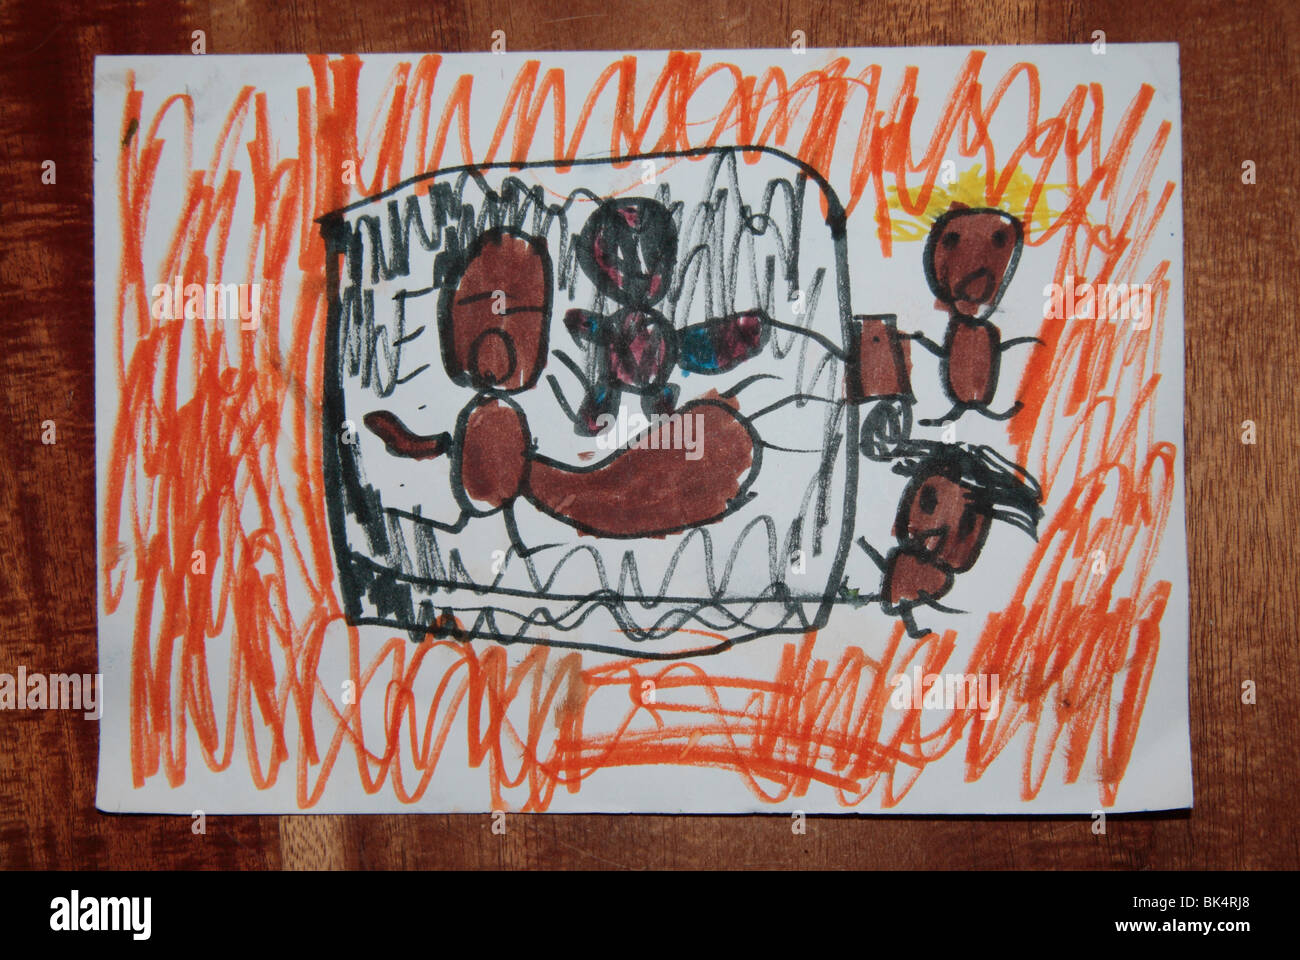 A child's drawing showing a baby inside a burning house. Spiderman has come to the rescue. Stock Photo